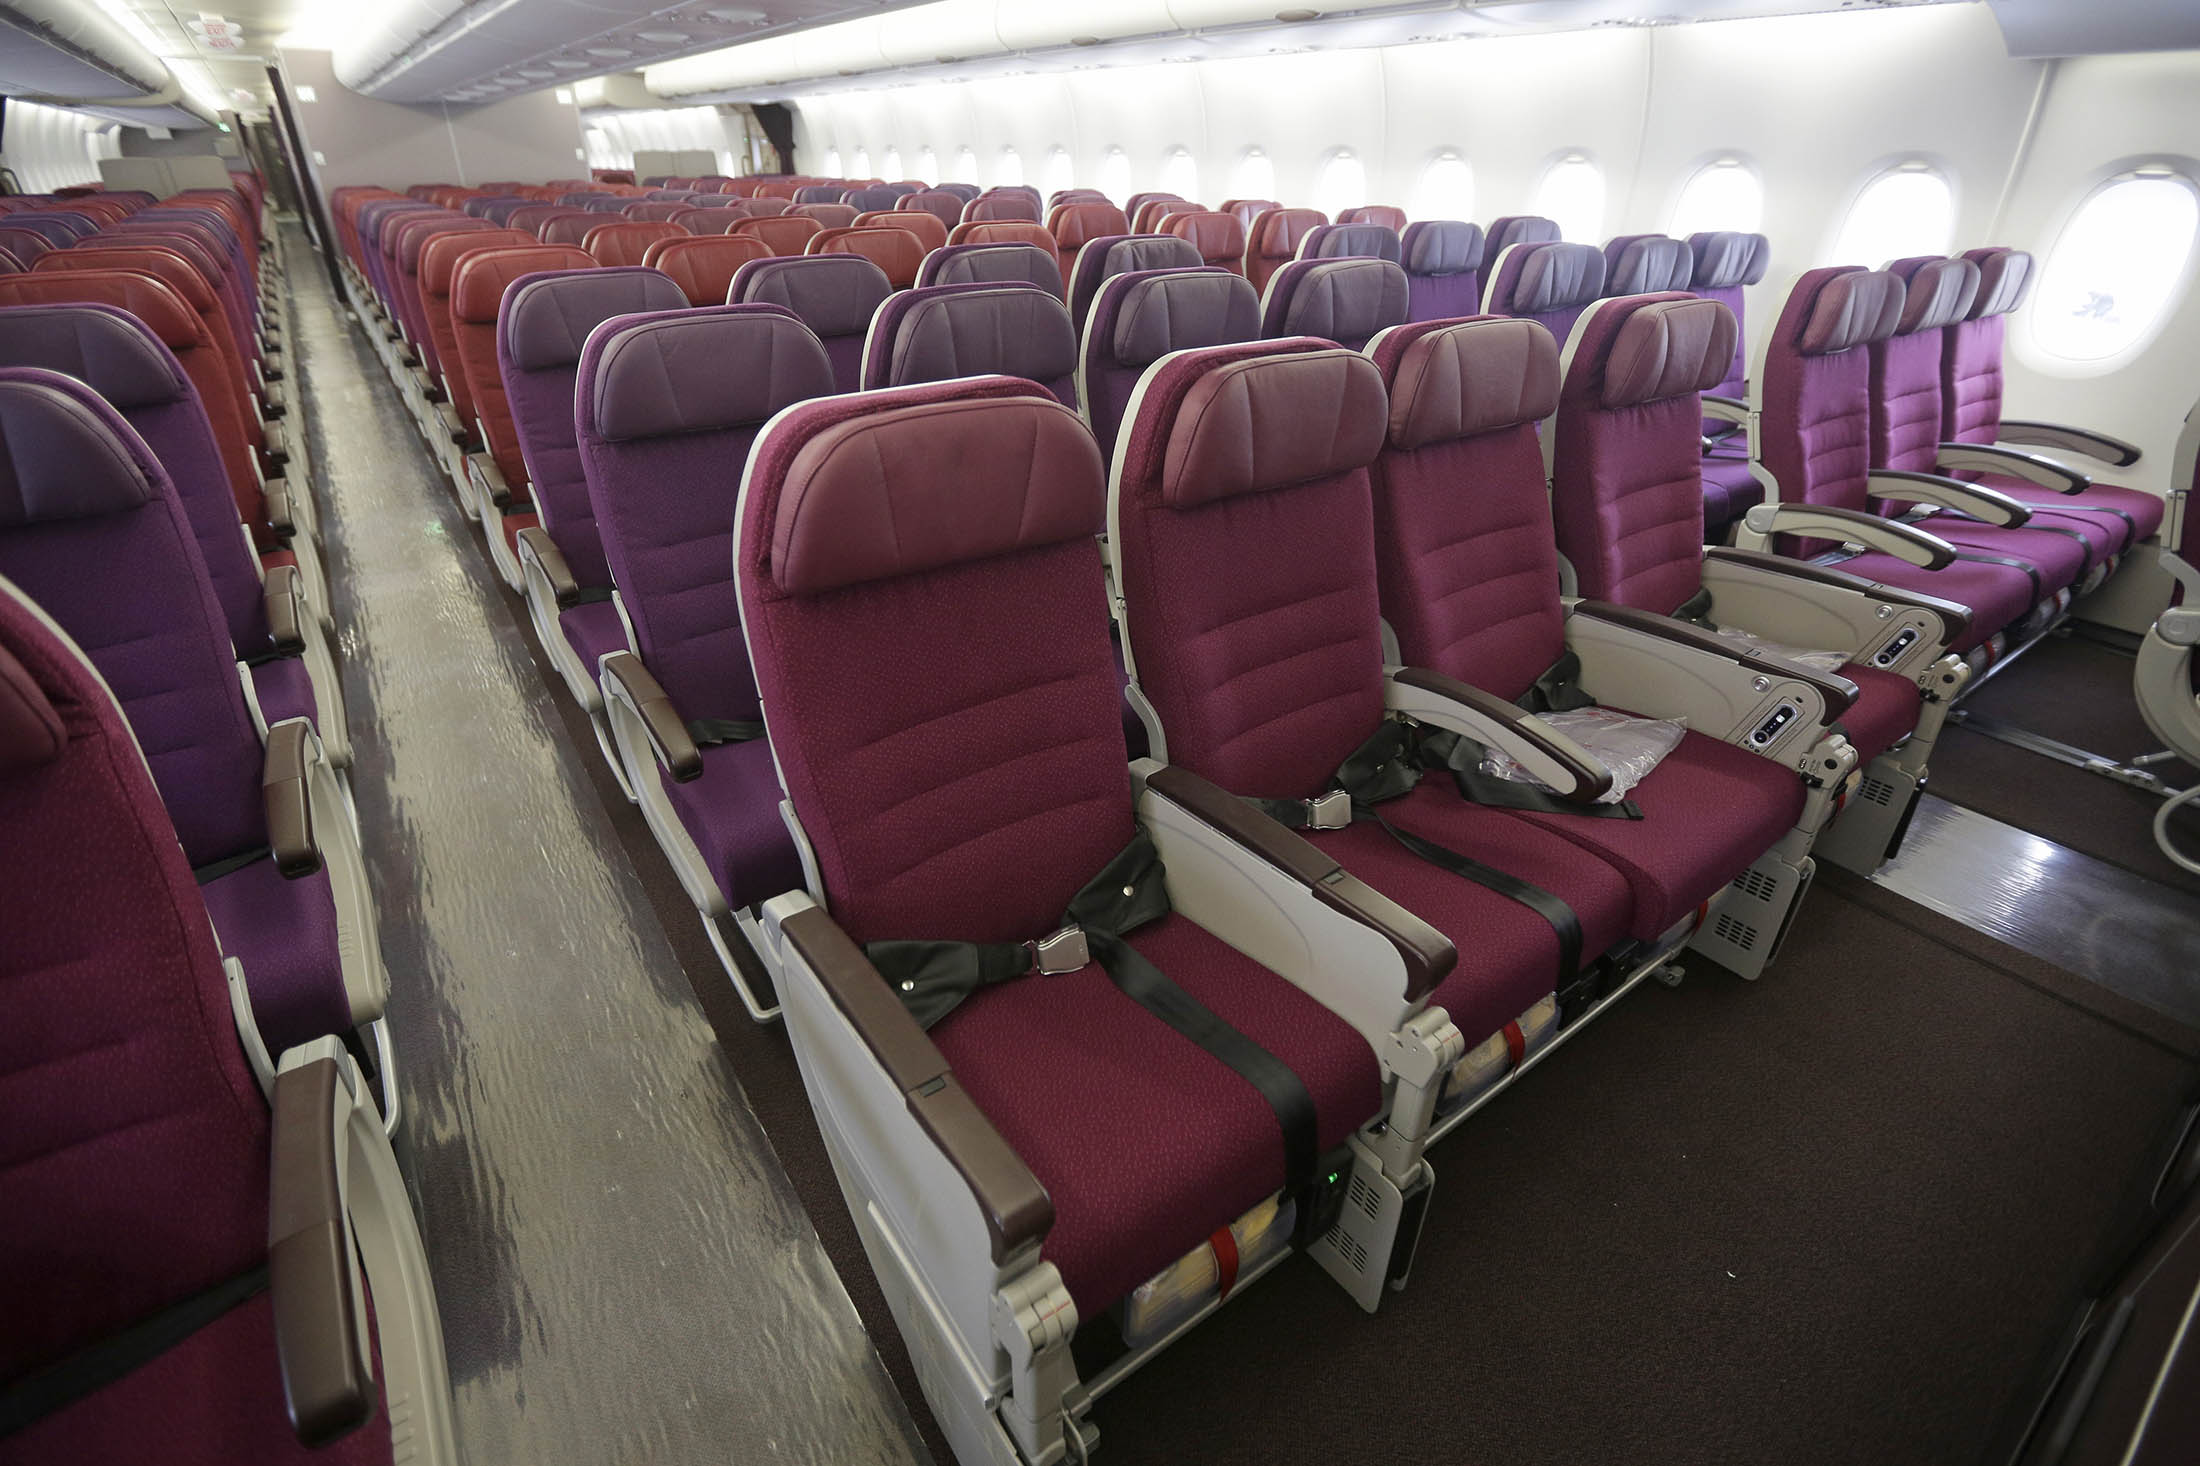 The economy class cabin of an Airbus SAS A380 airplane operated by Malaysia Airline System Bhd. is seen on the first day of the Farnborough International Air Show in Farnborough, U.K., on Monday, July 9, 2012. The Farnborough International Air Show runs from July 9-15.
